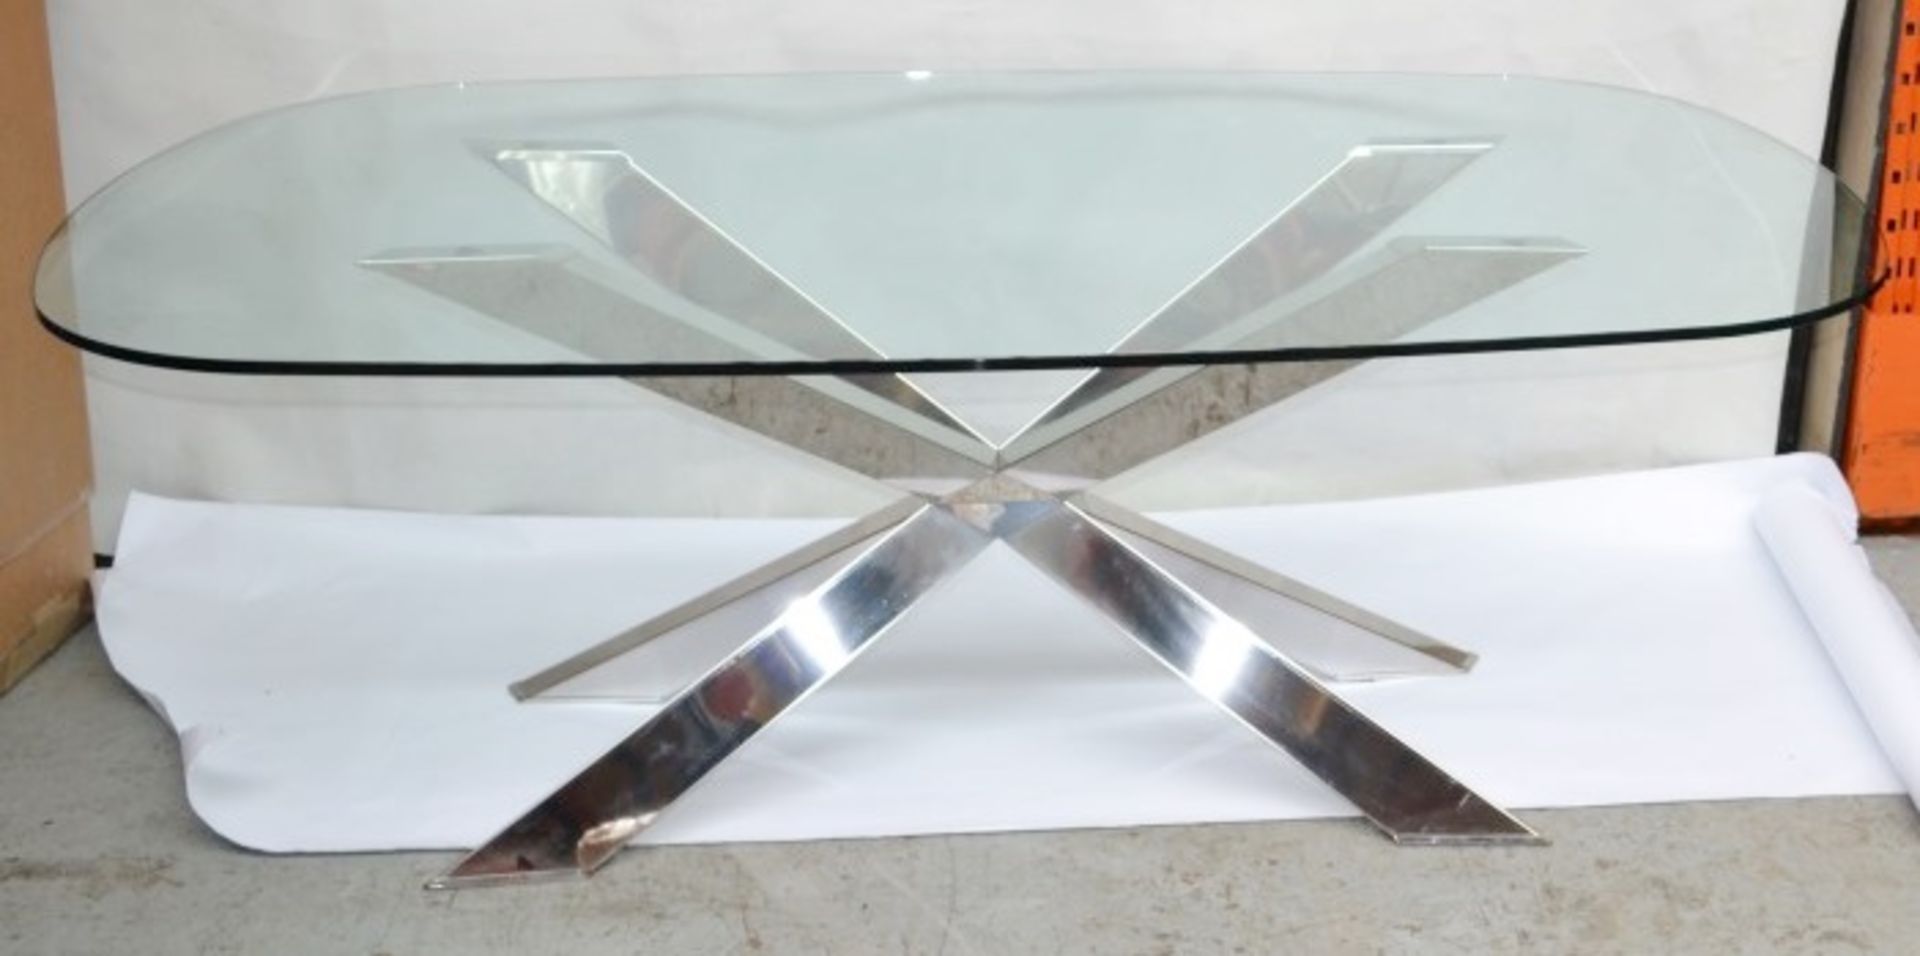 1 x CATTELAN "Spyder" Glass Topped Table - Stunning Piece In Great Condition - Dimensions: - Image 2 of 6